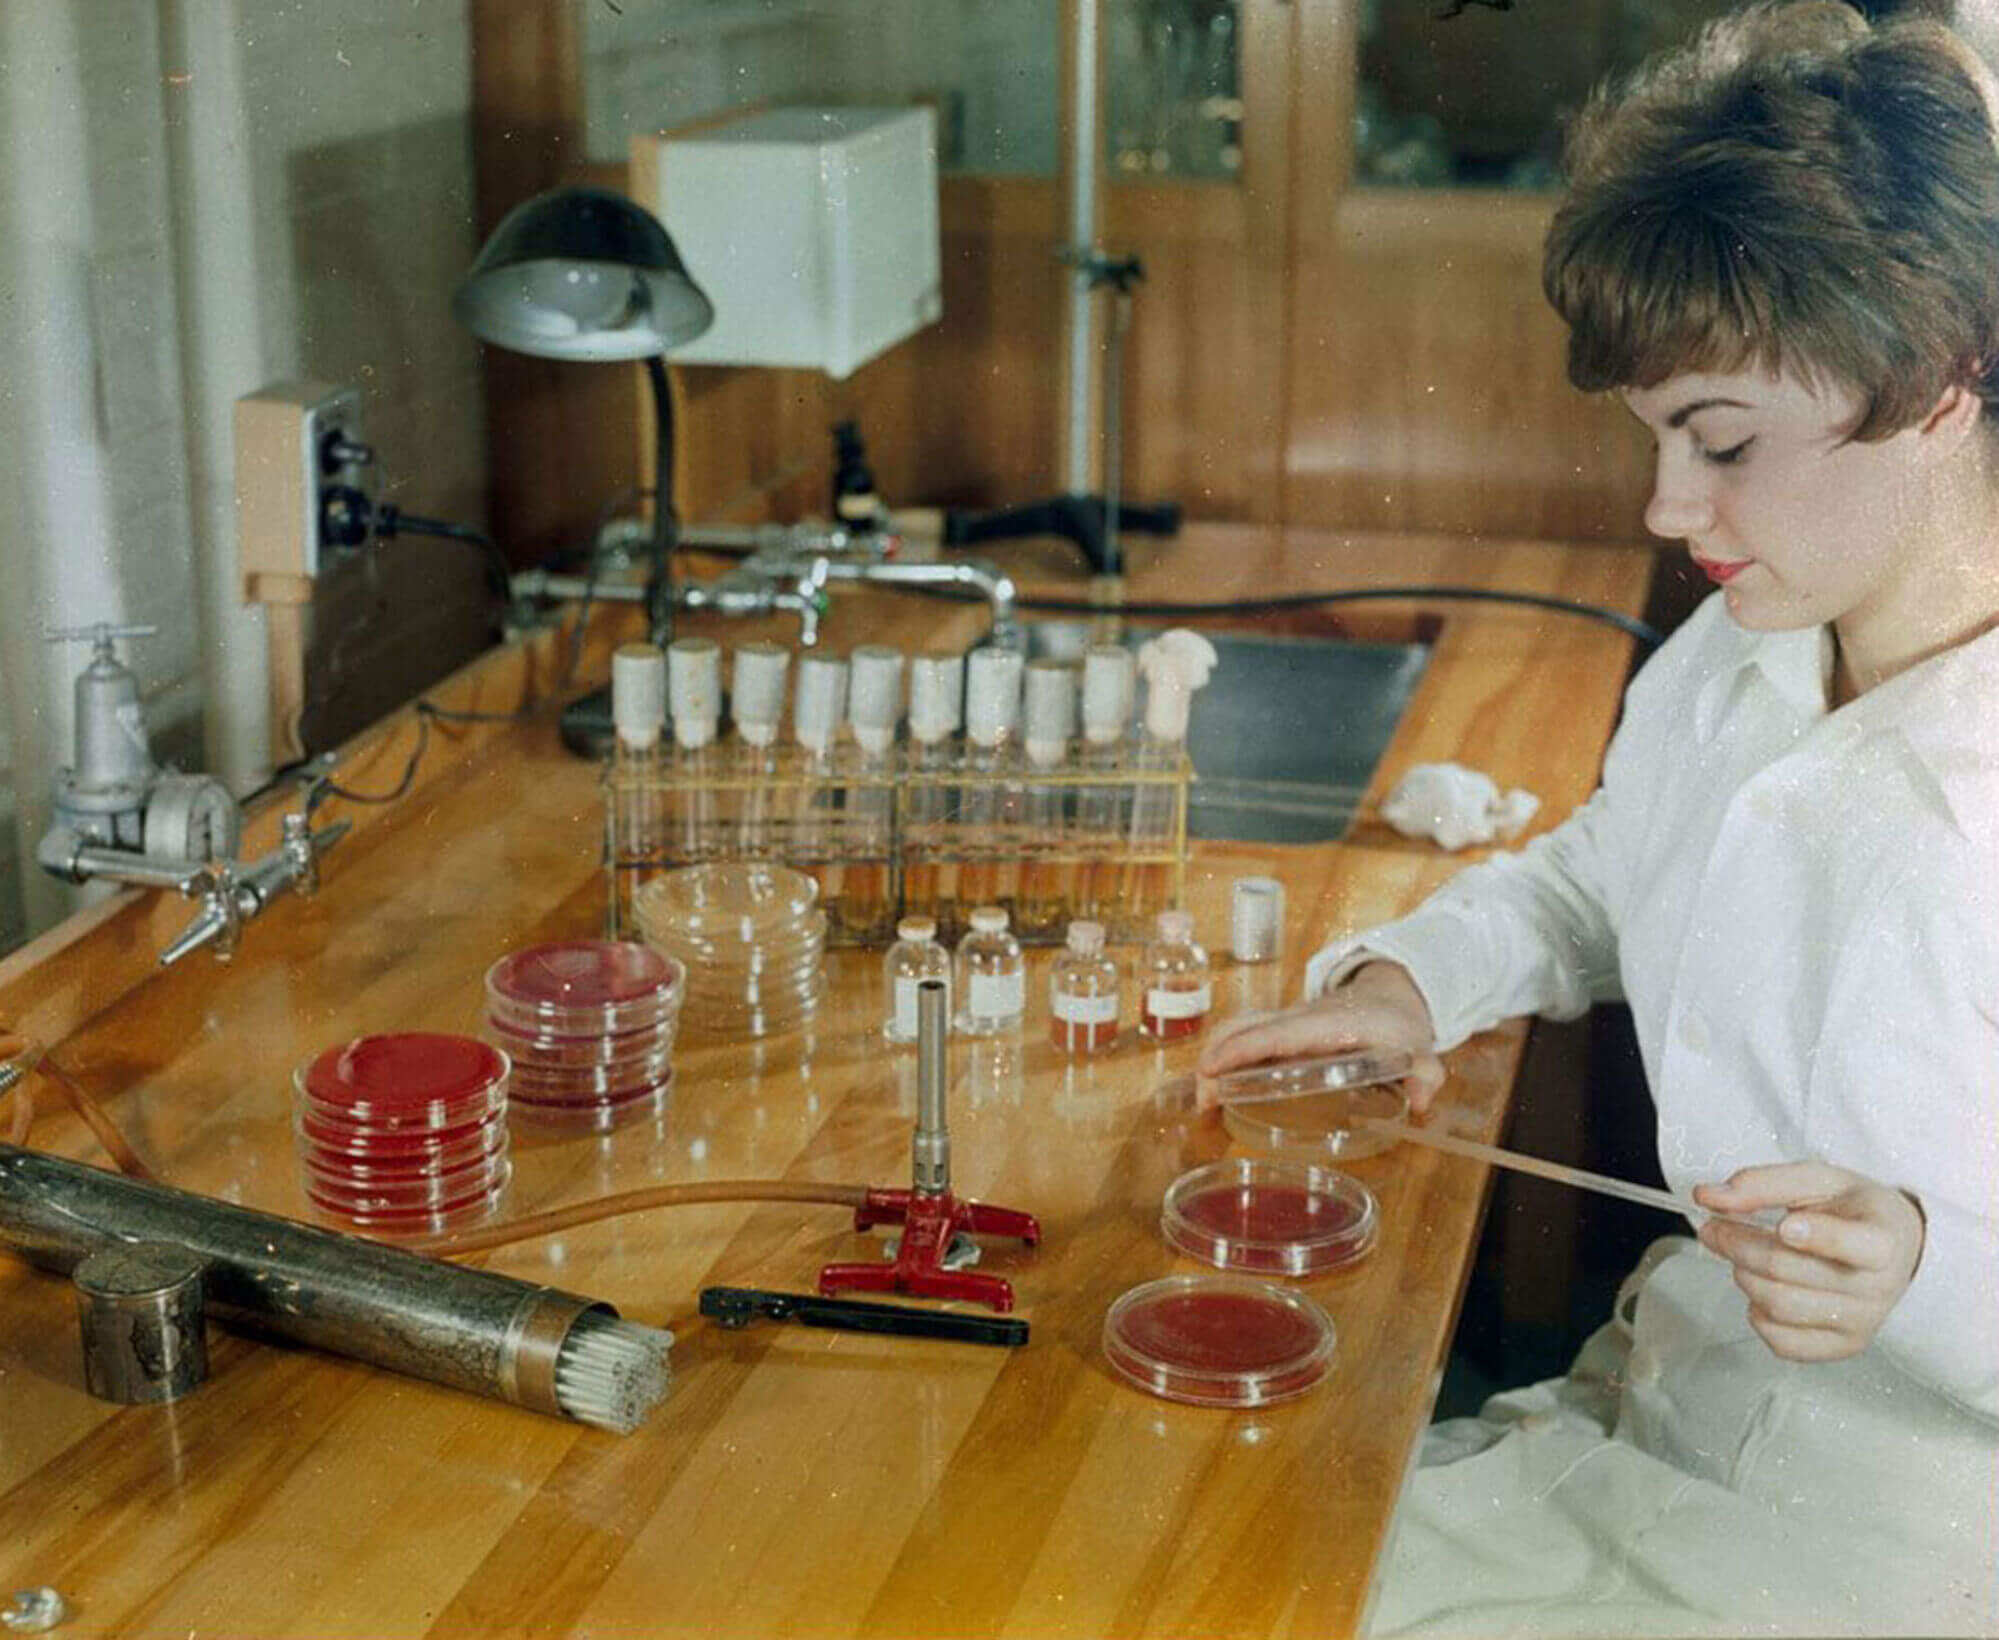 Woman seated at a workstation applies an unknown substance to petri dishes, of which several are visible, along with a tray of beakers.